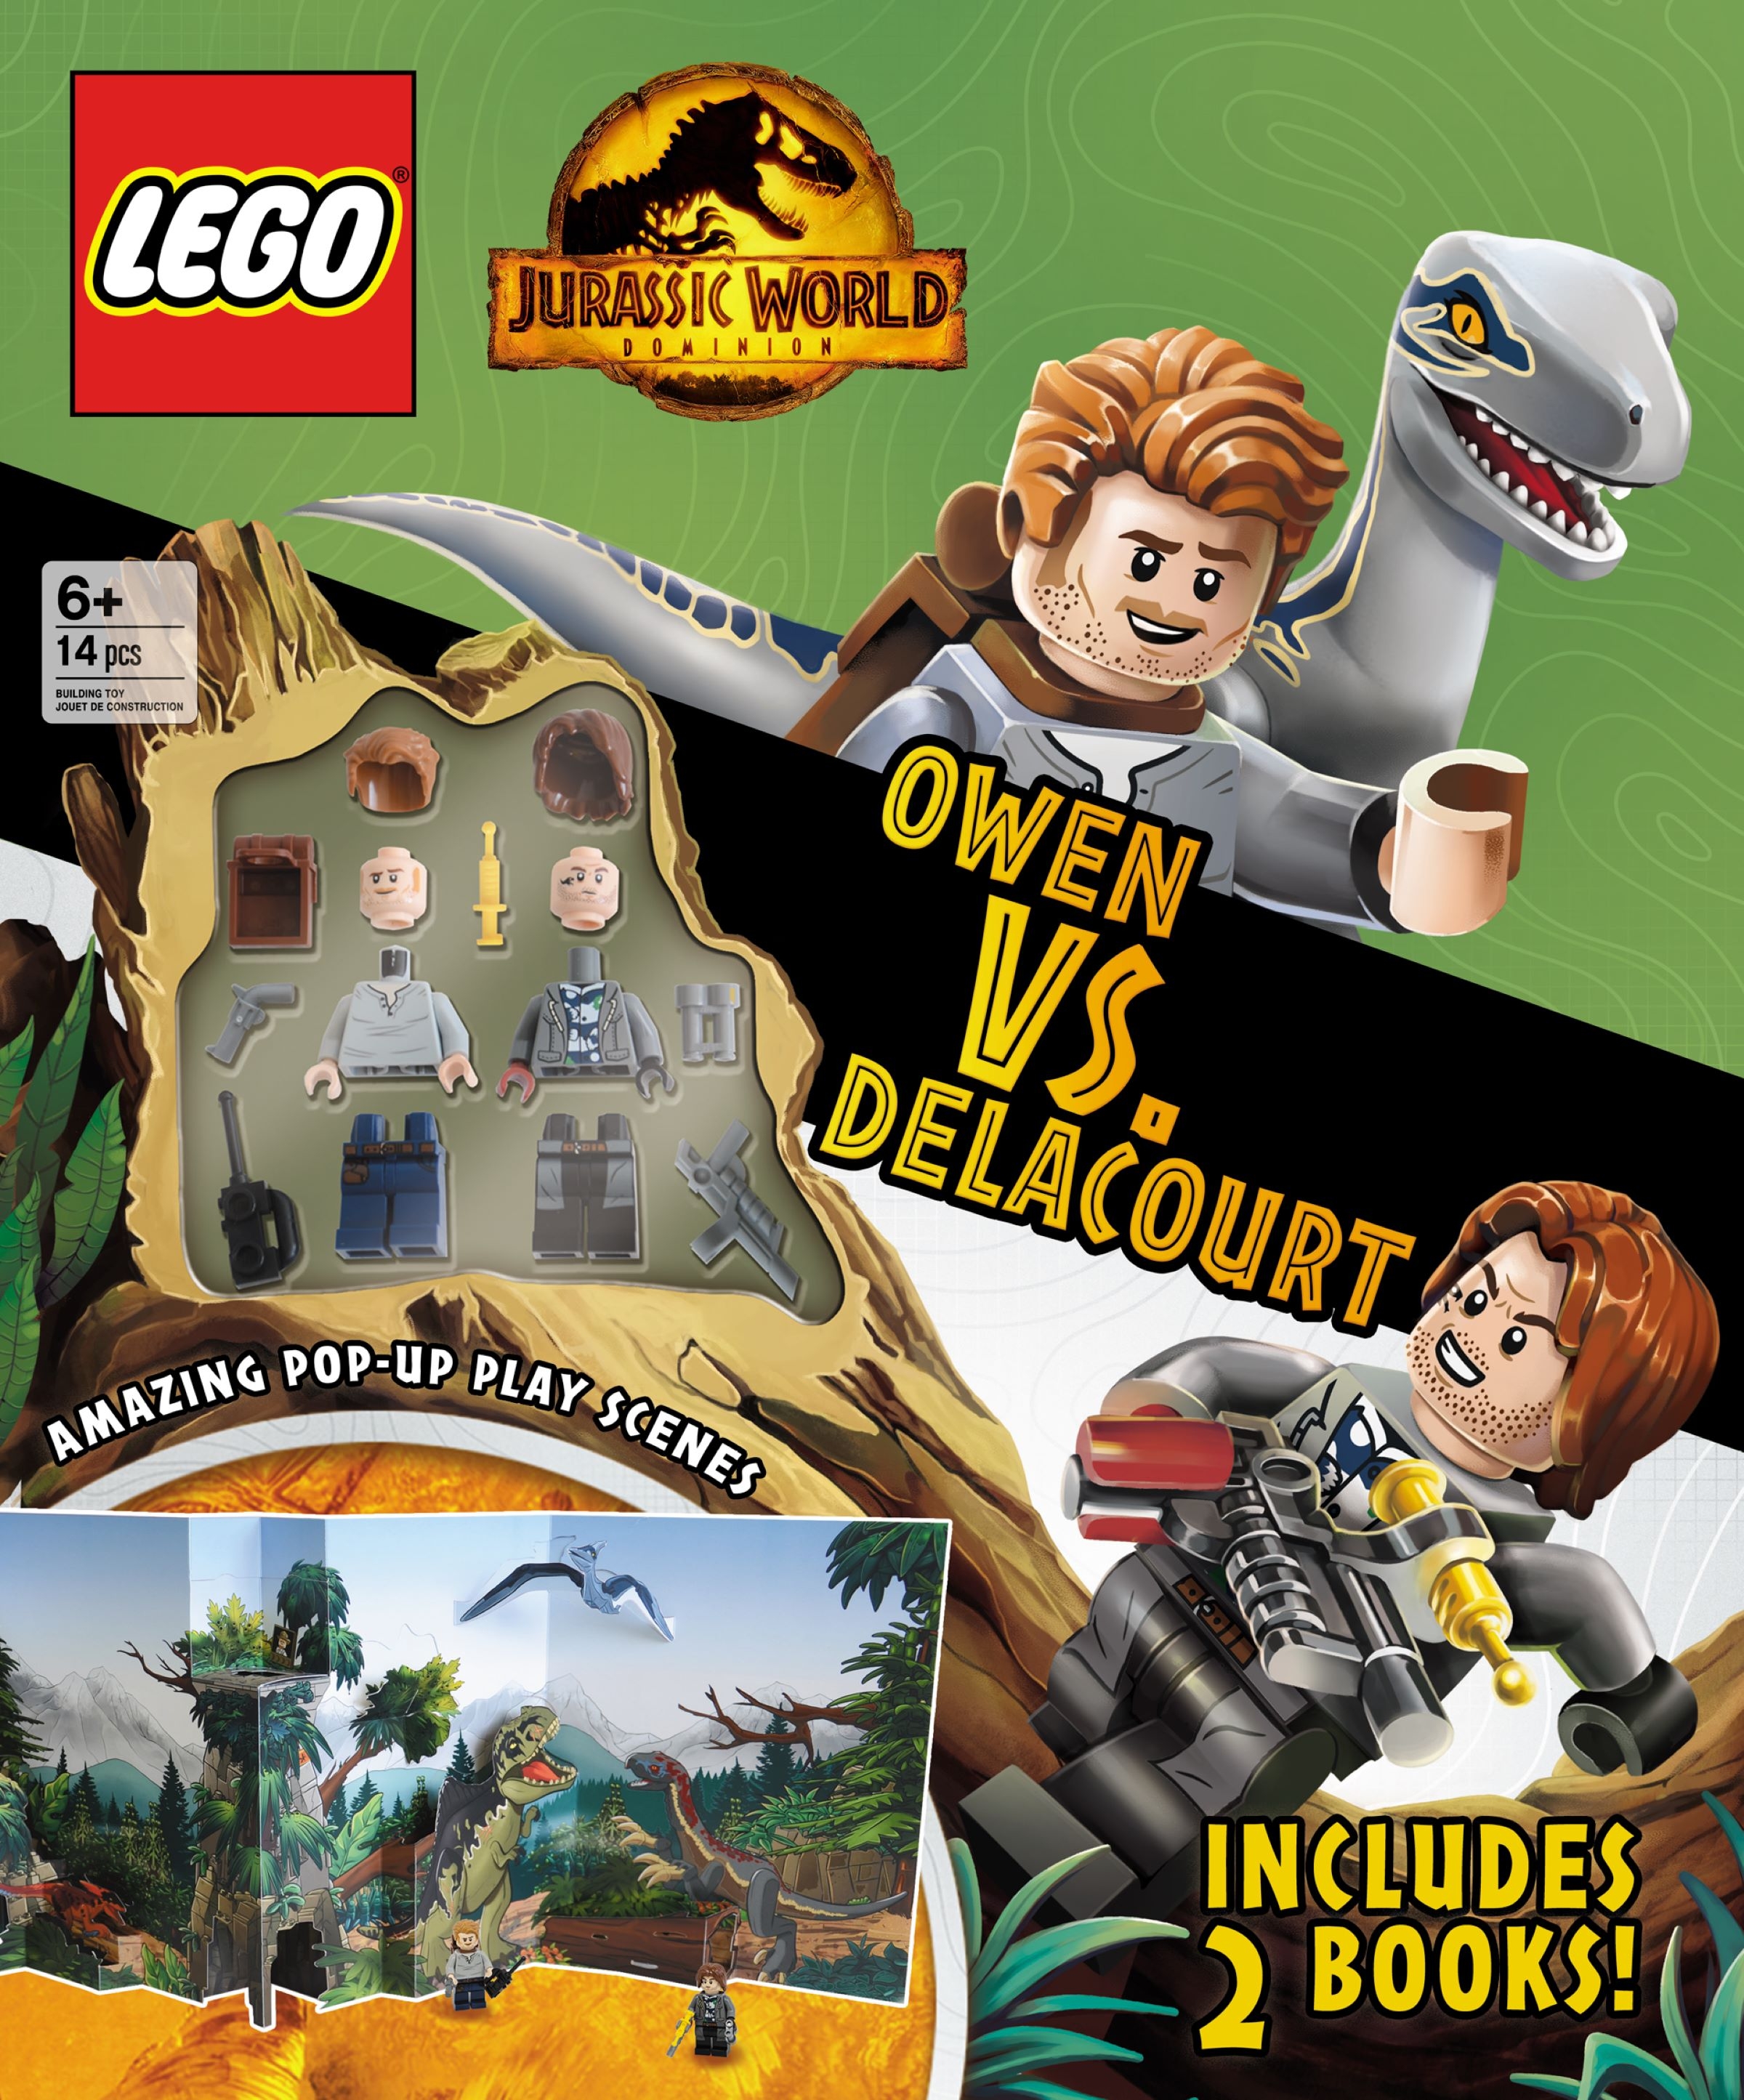 Jurassic World Toys and Gifts Official